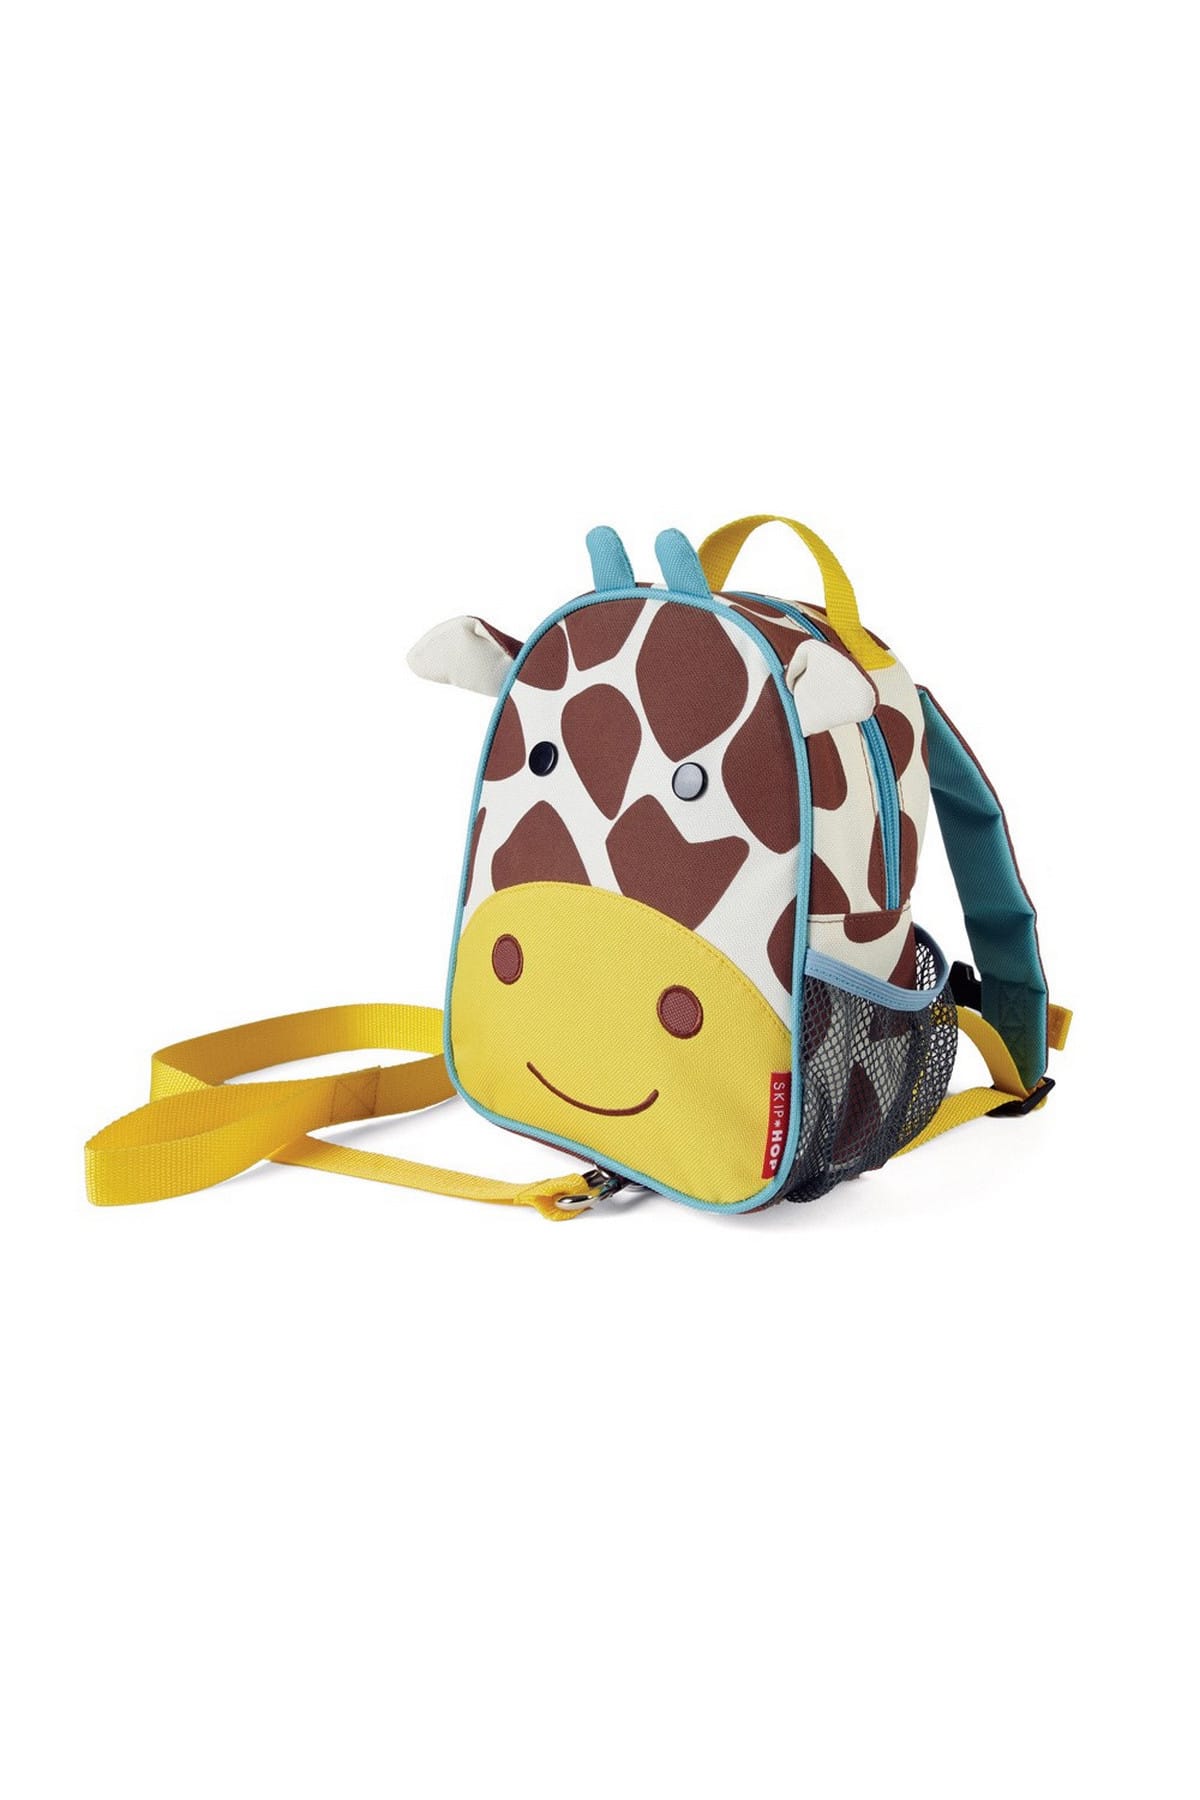 Zoo Backpack with Safety Belt Brown